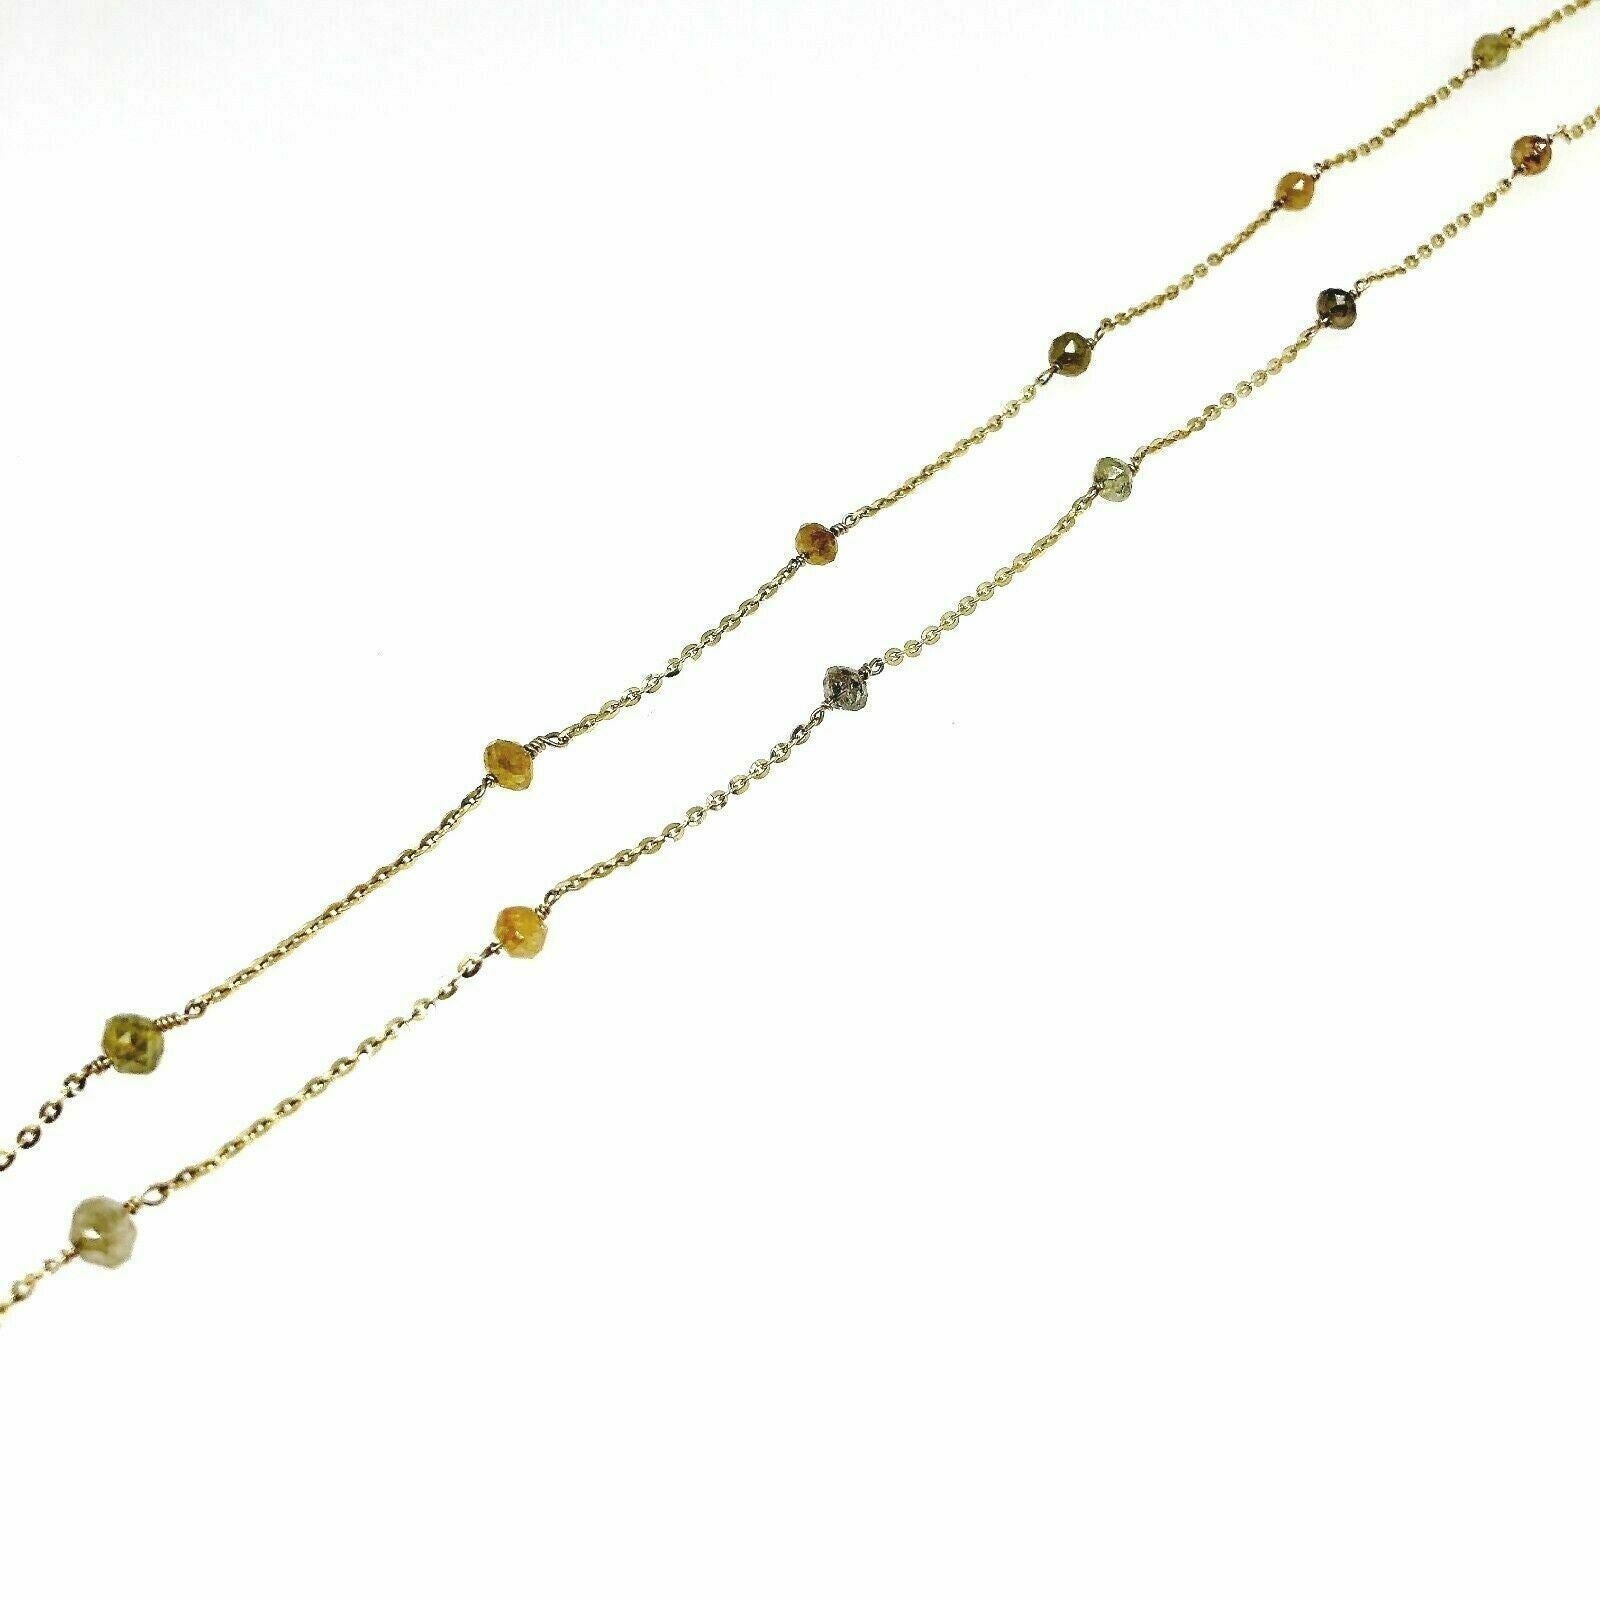 Hand Made 8.70 Carats Natural Rough Diamond By The Yard Necklace 14k Yellow Gold